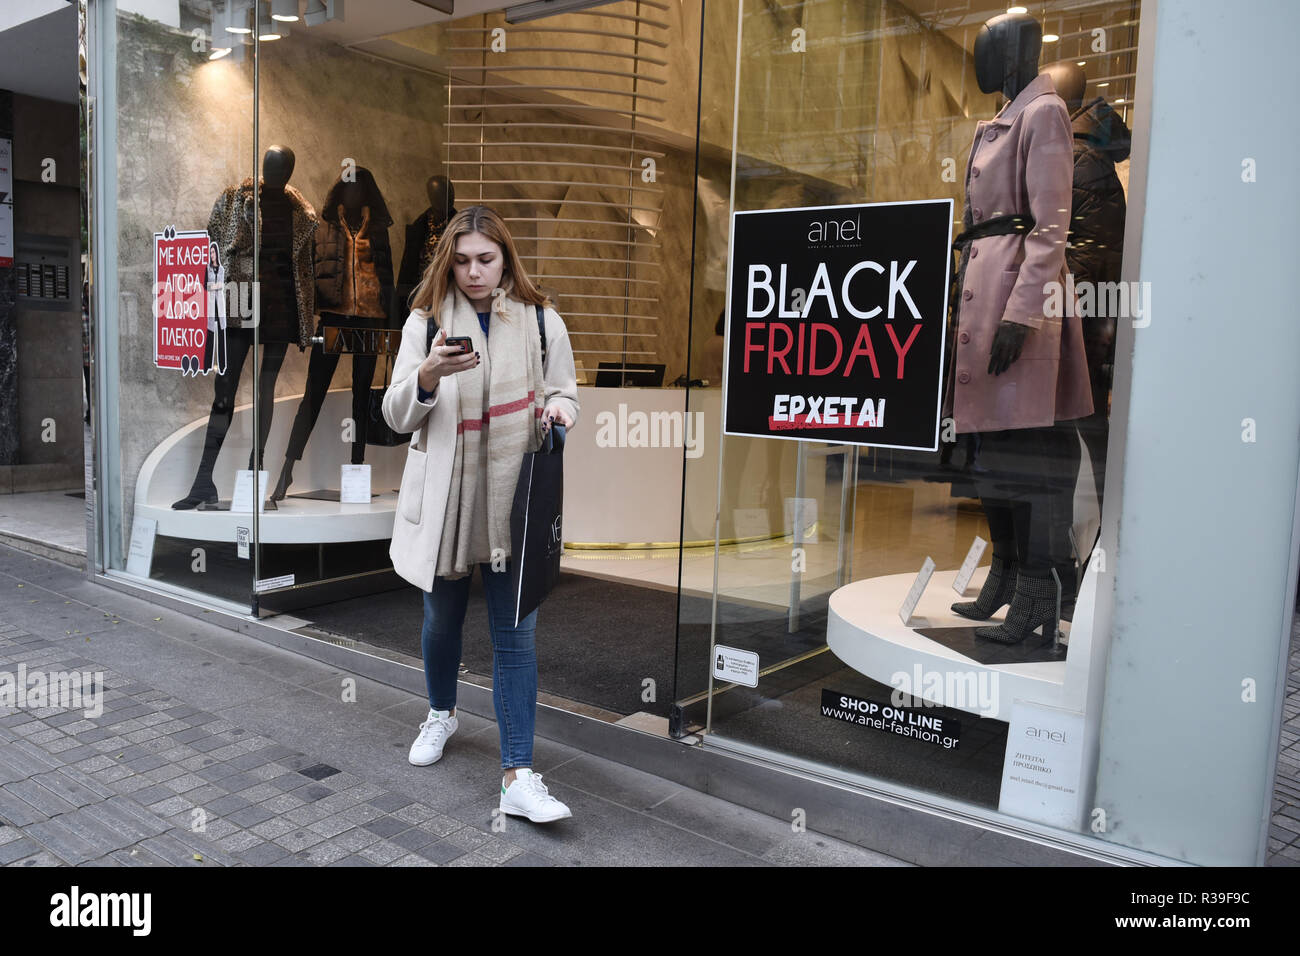 November 22, 2018 - Thessaloniki, Greece - A woman exits from a clothes  shop at the center of the city. Shops in Thessaloniki are getting ready for  tomorrow's Black Friday deals. (Credit